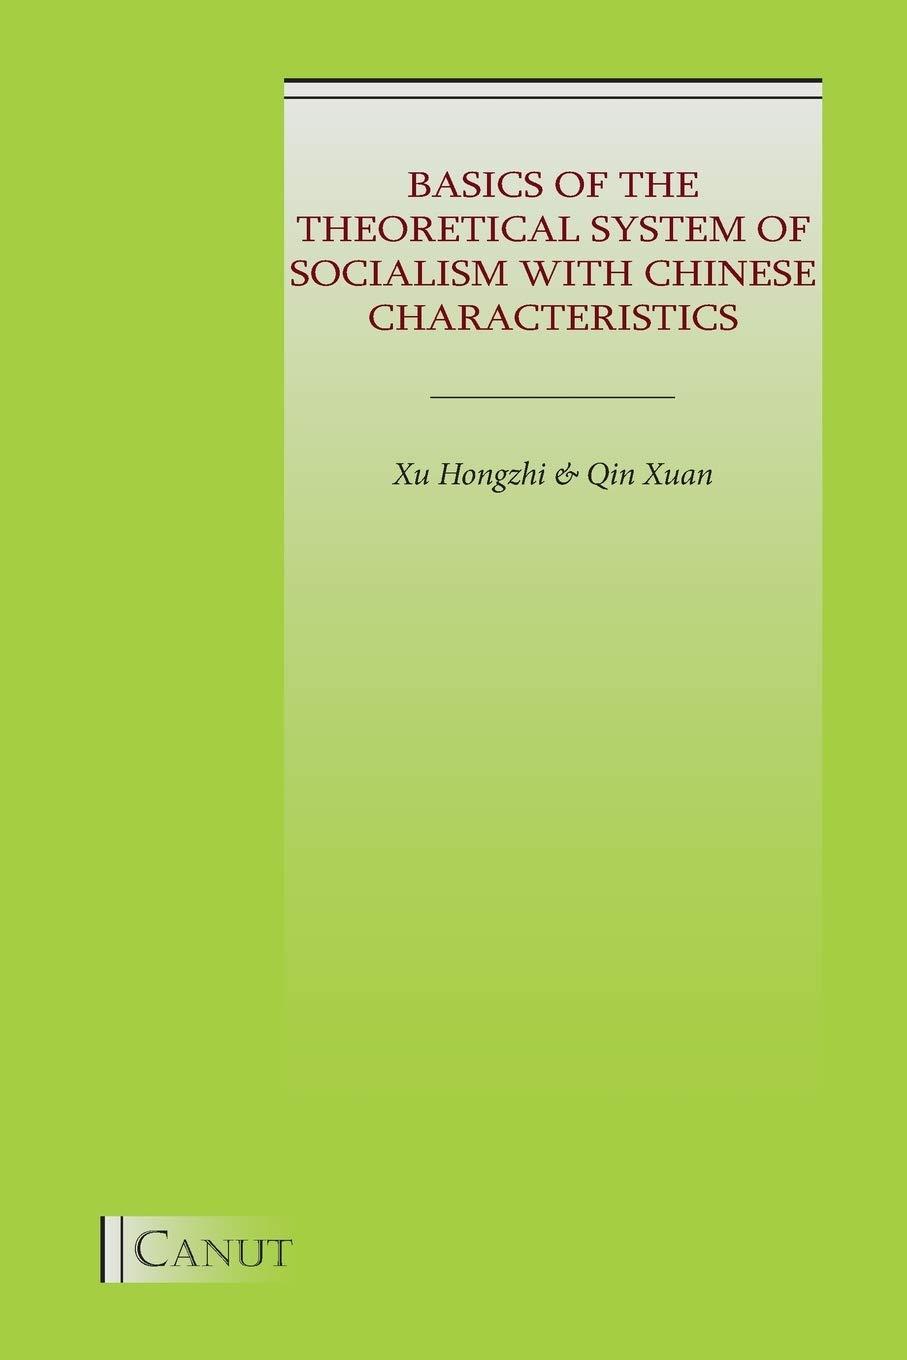 Chinese Academy of Social Sciences, Chinese Characteristic Socialism Theoretical System Research Center